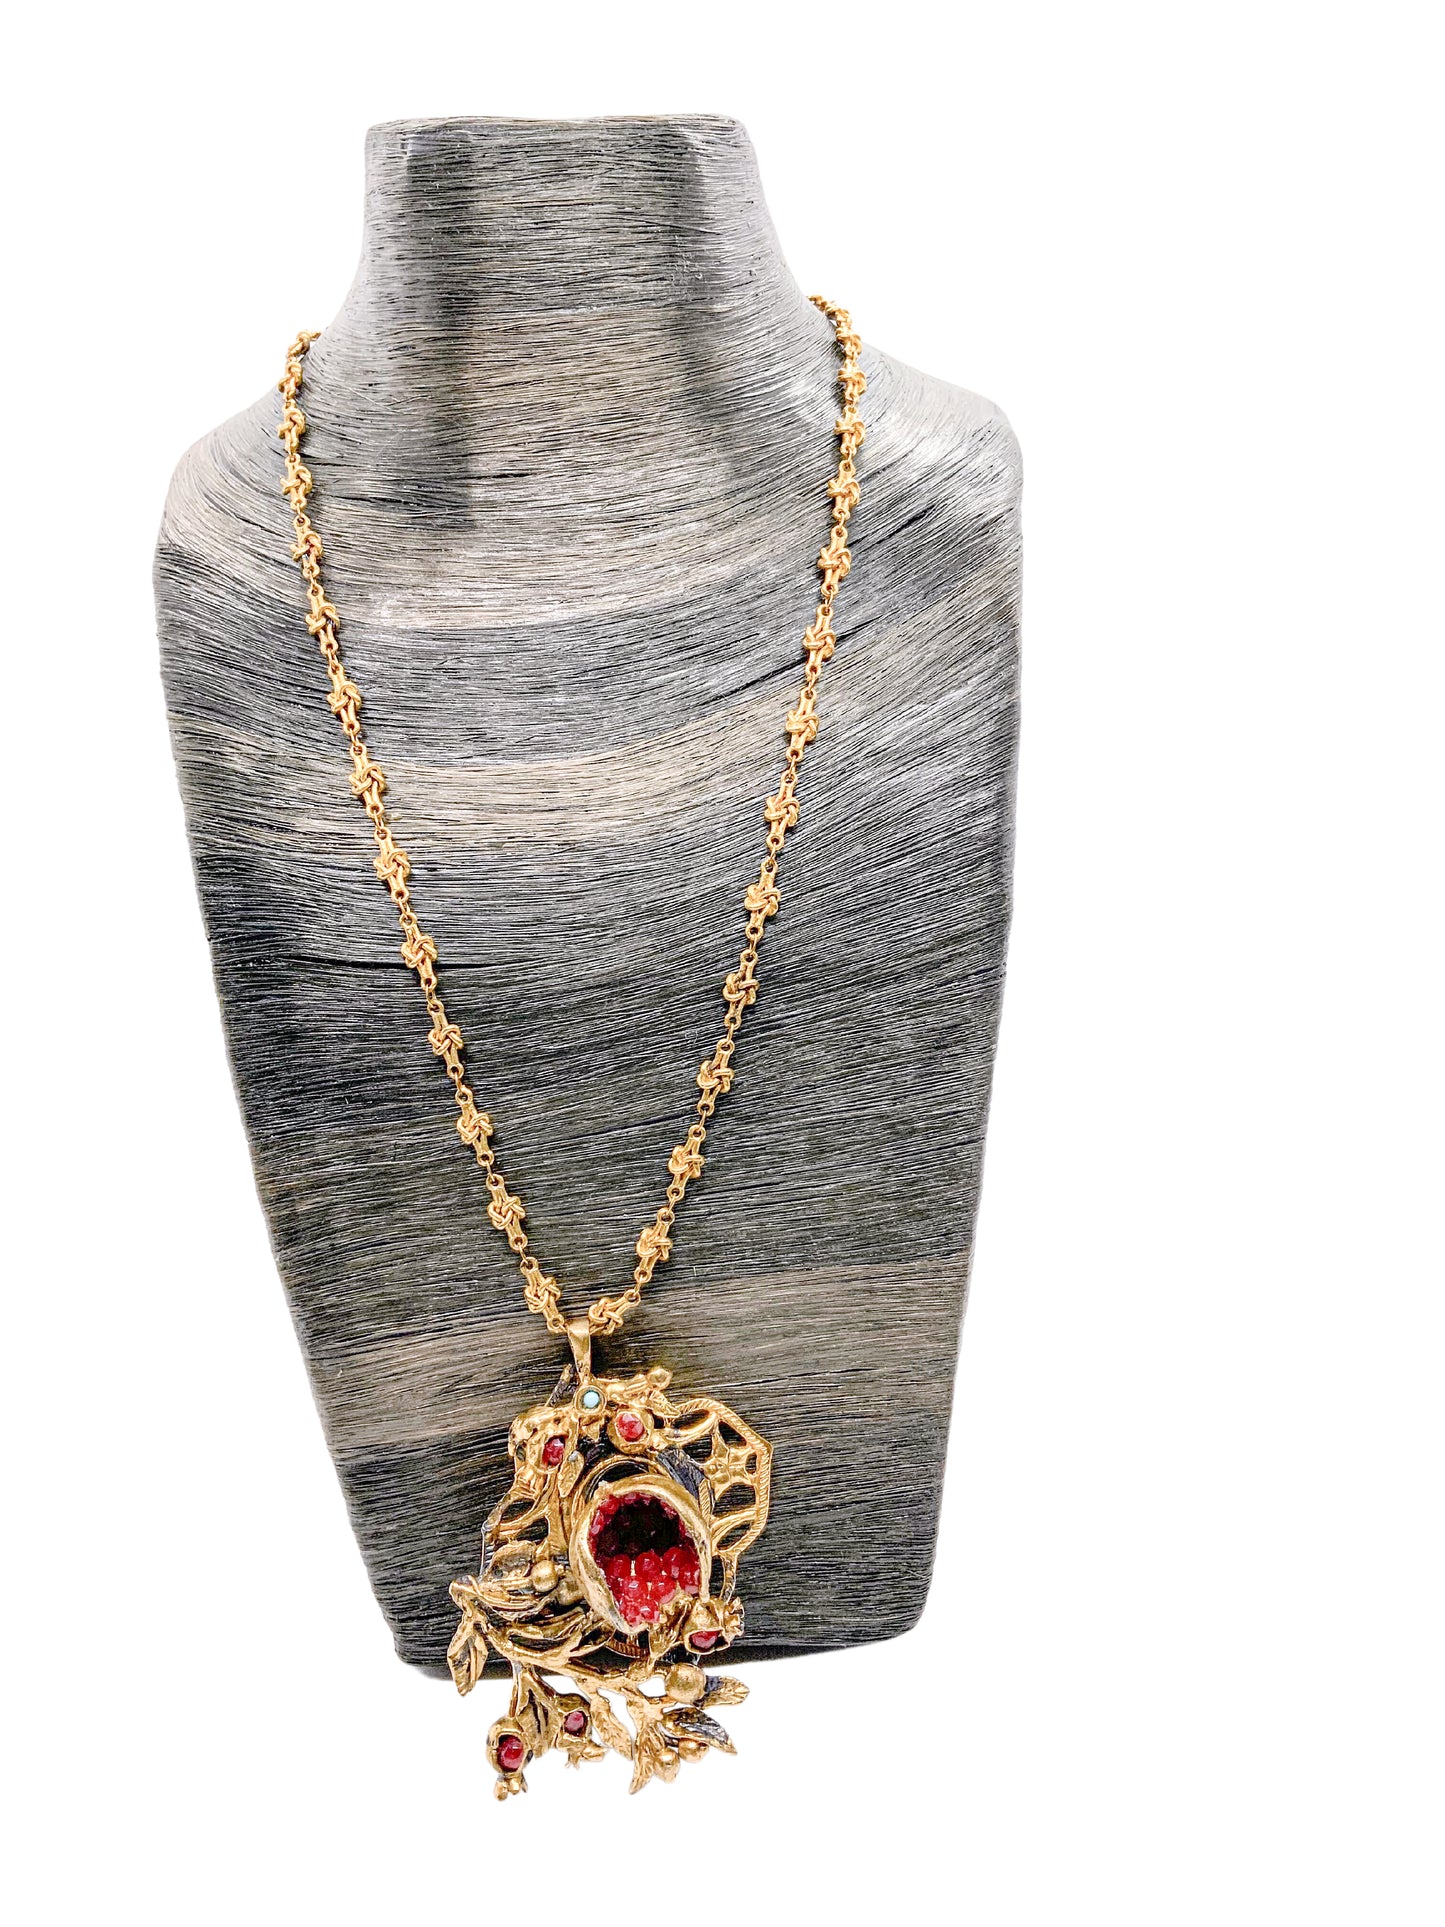 Statement Piece with Pomegranate and Turquoise Necklace